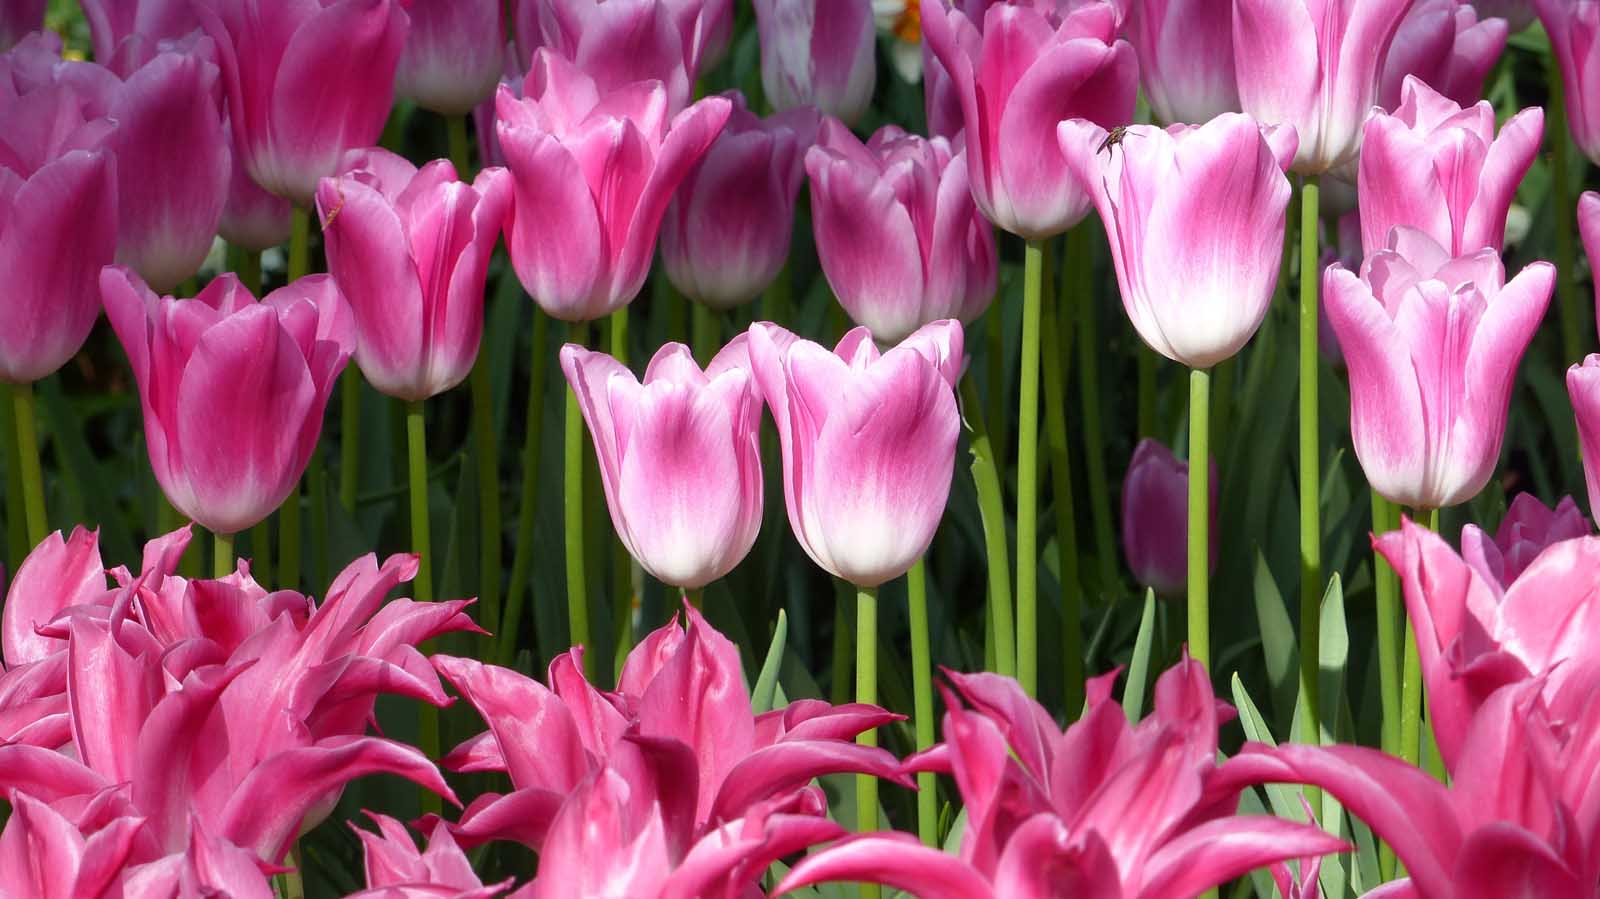 Tulips in the Botanical Gardens Plantage Area of Amsterdam